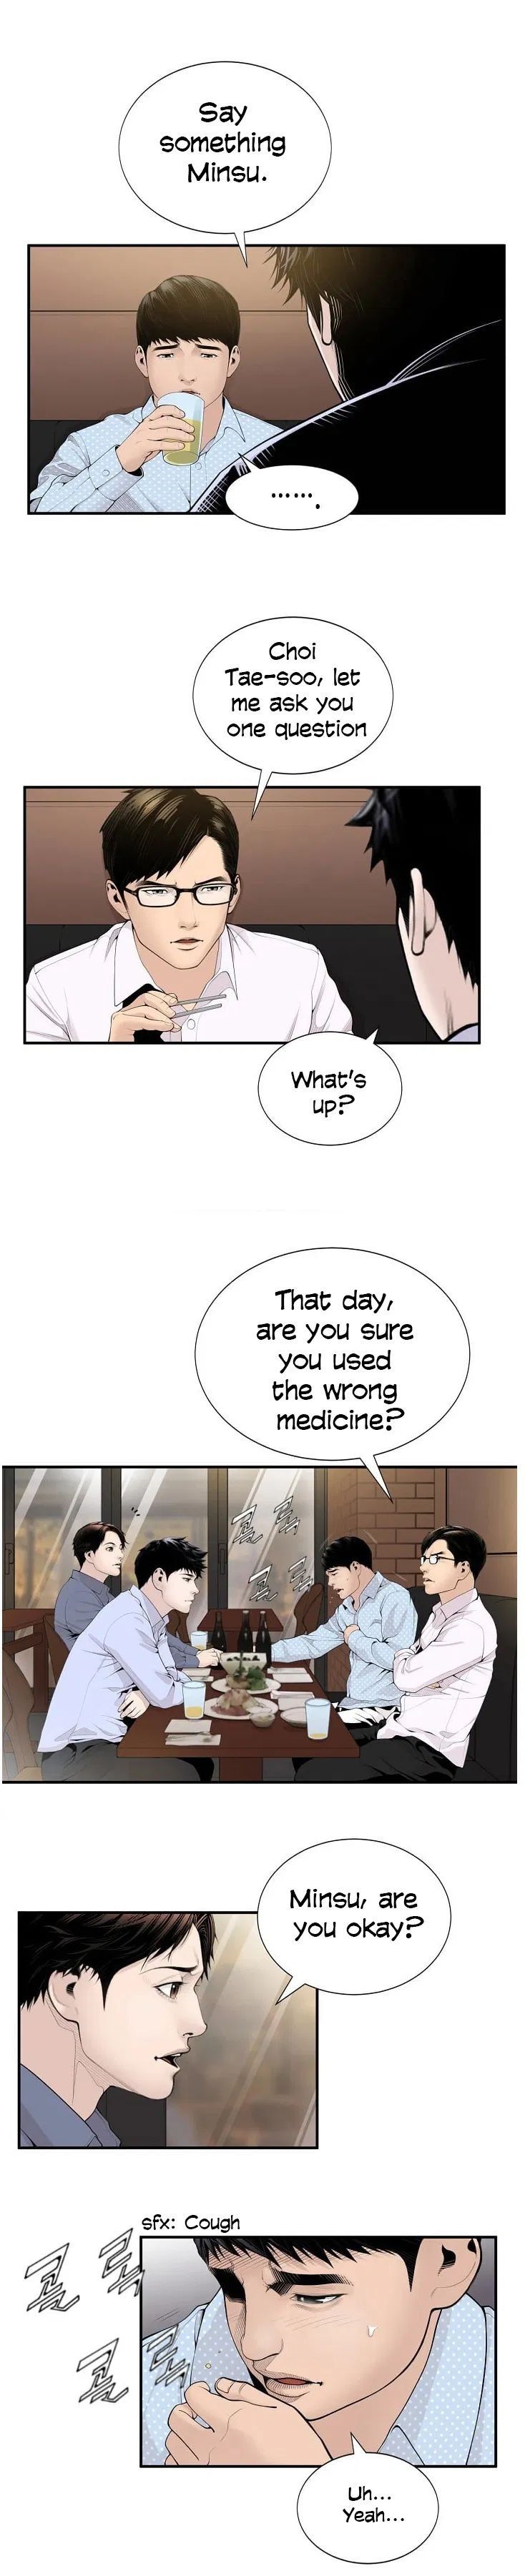 Dr. Choi Tae-Soo Chapter 12 page 12